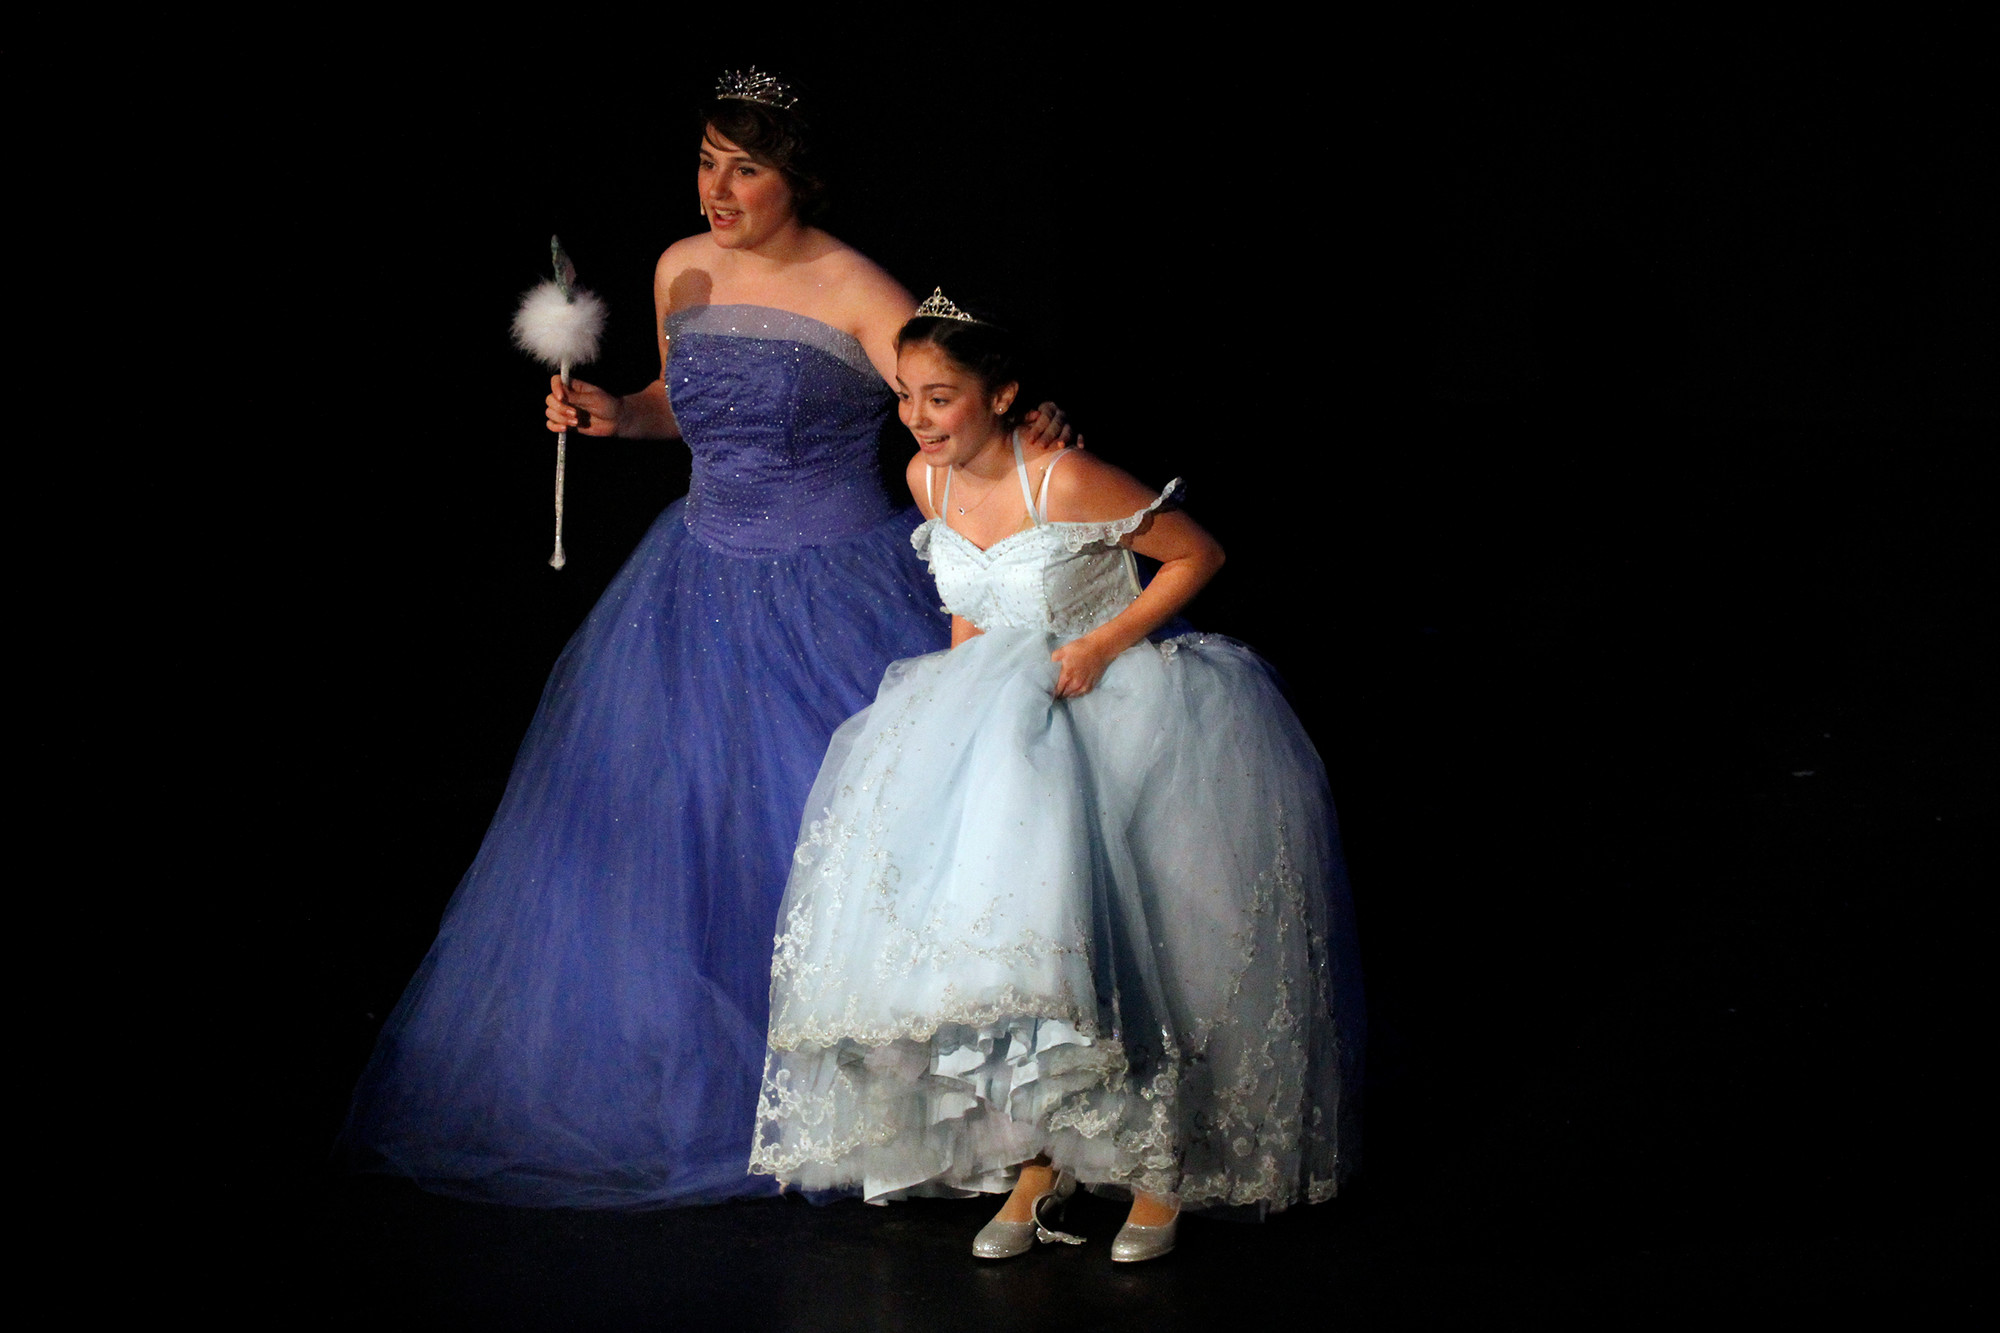 Cinderella (Melissa Aliotta), right, and her Fairy Godmother (Elizabeth Redmond) get ready for the Prince’s ball.